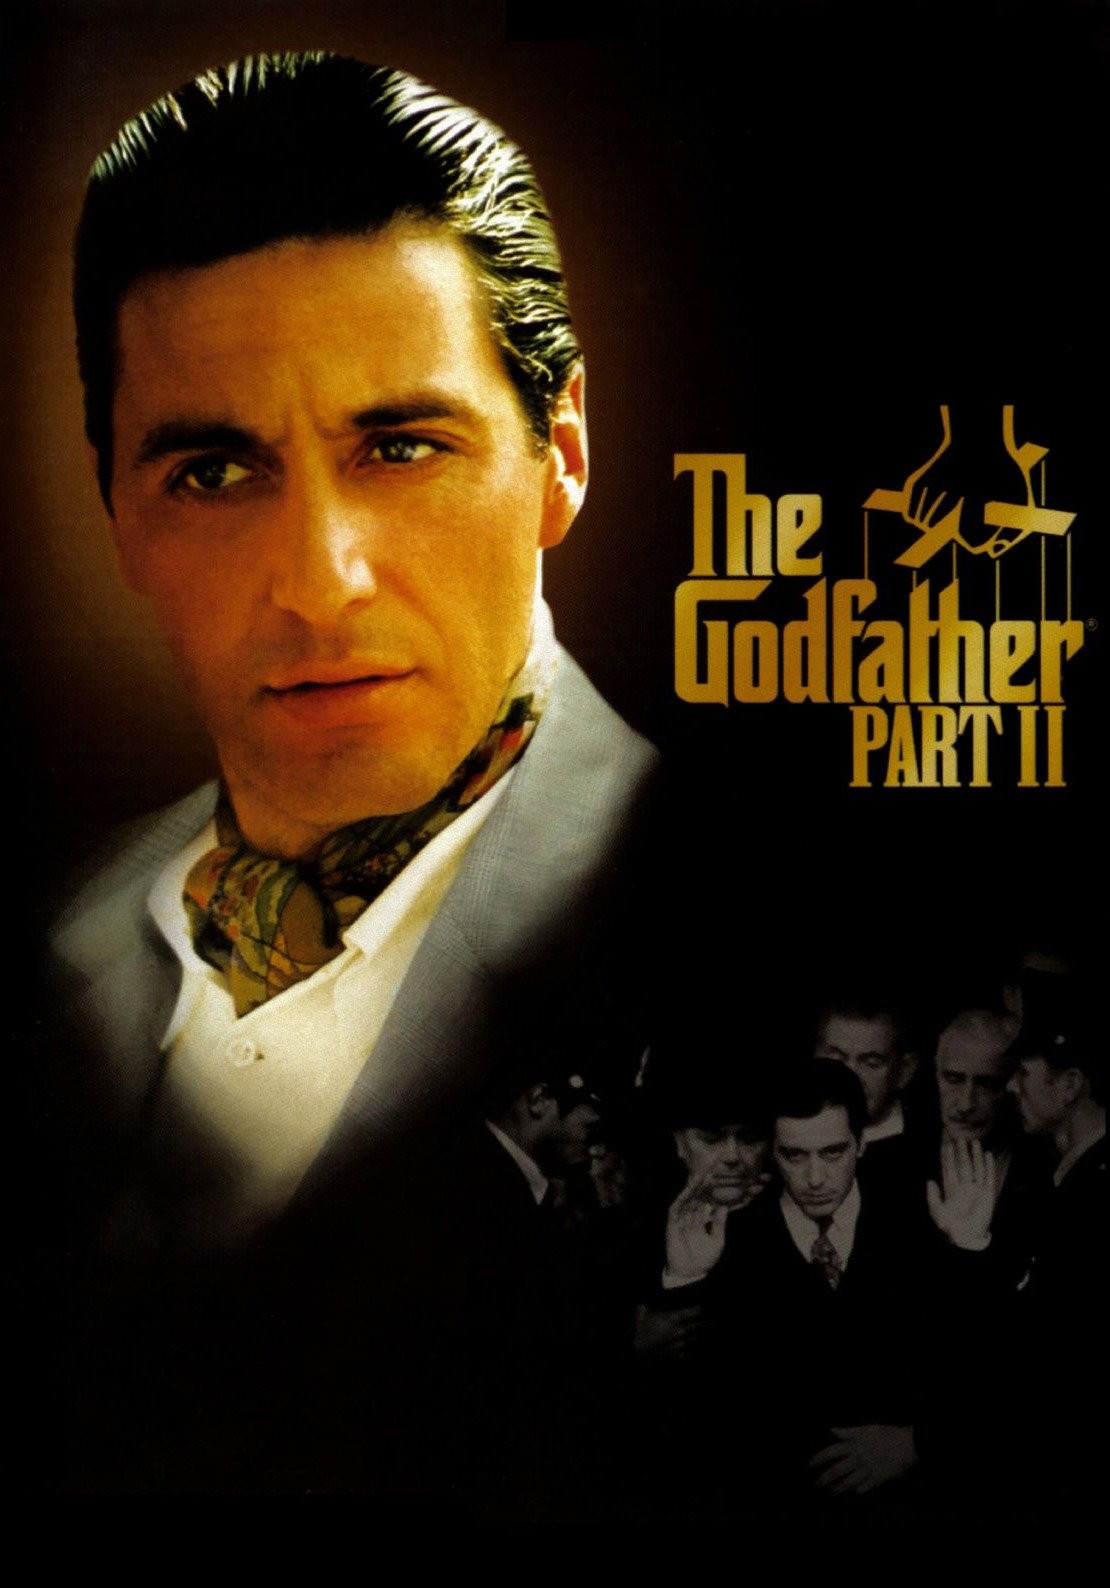 movies, Al Pacino, The Godfather, Movie Poster, Michael